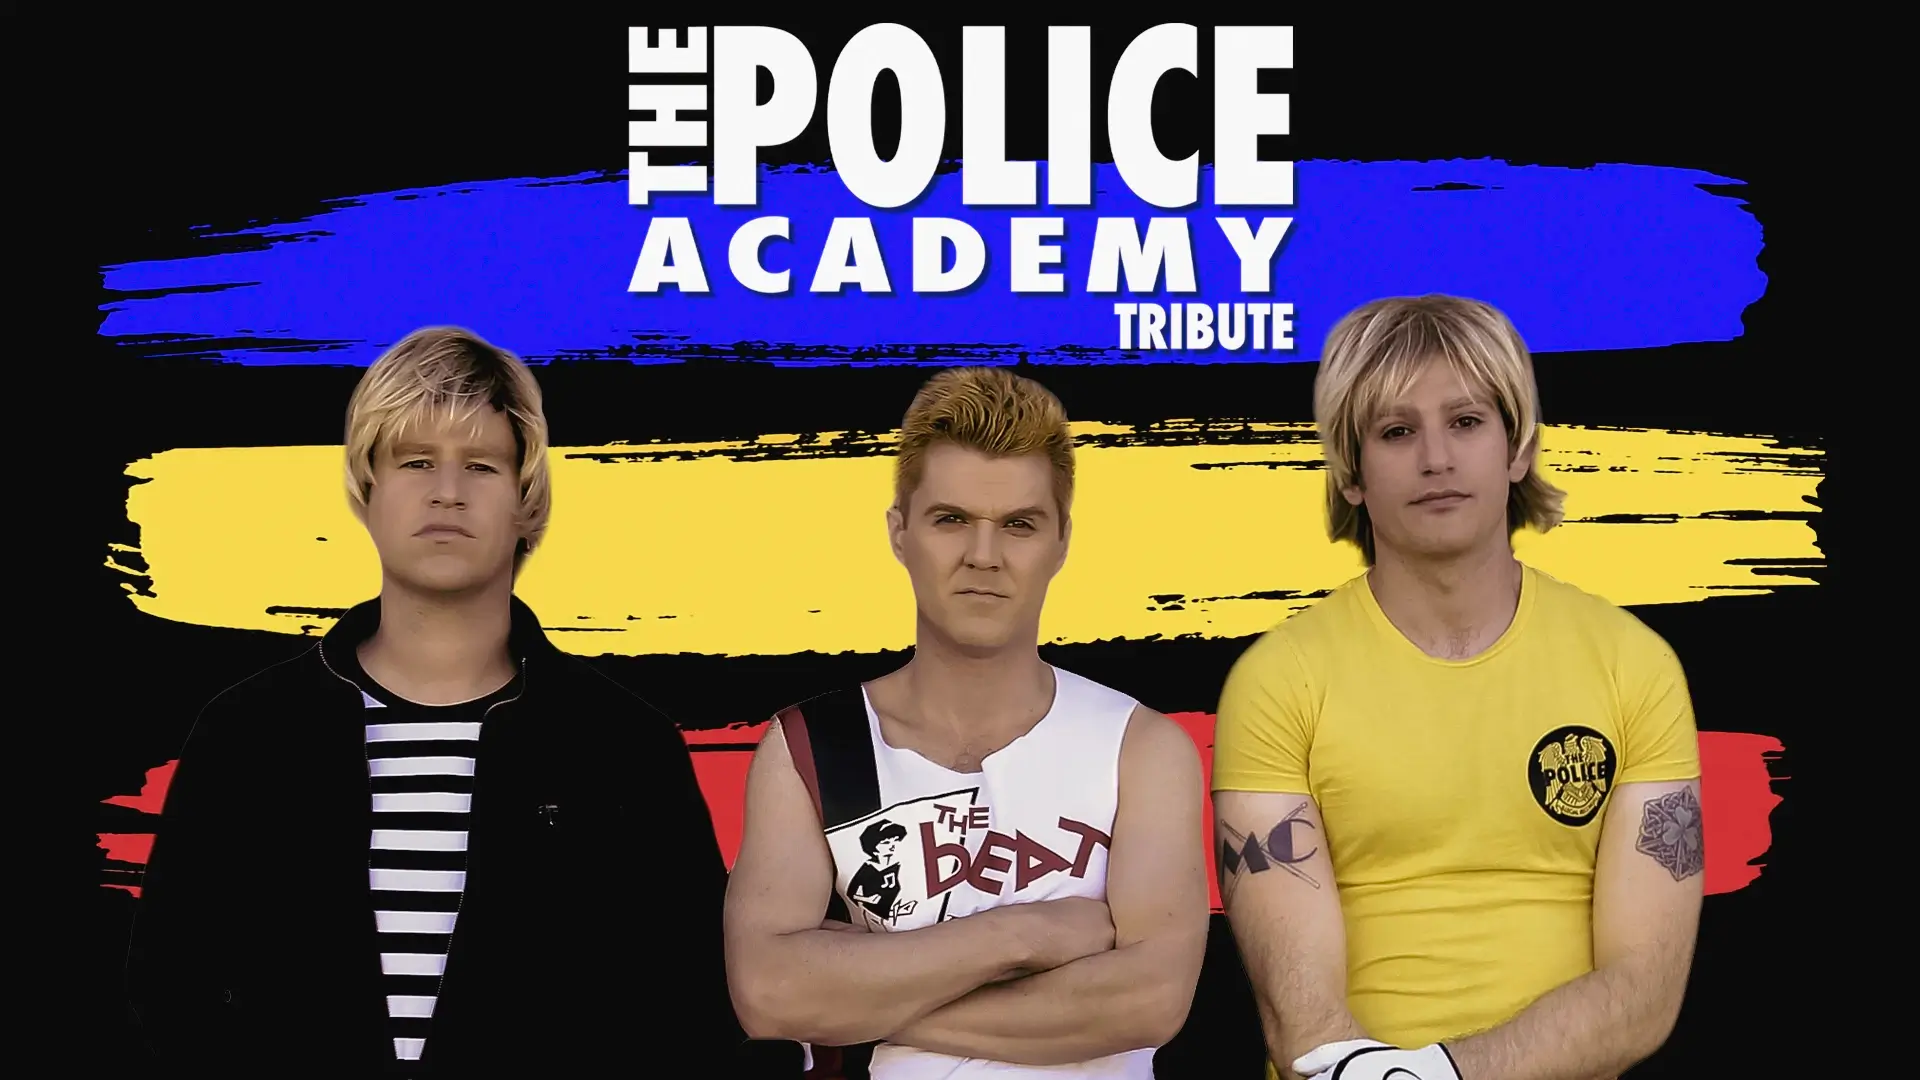 The Police Academy tribute - America's Greatest tribute to The Police